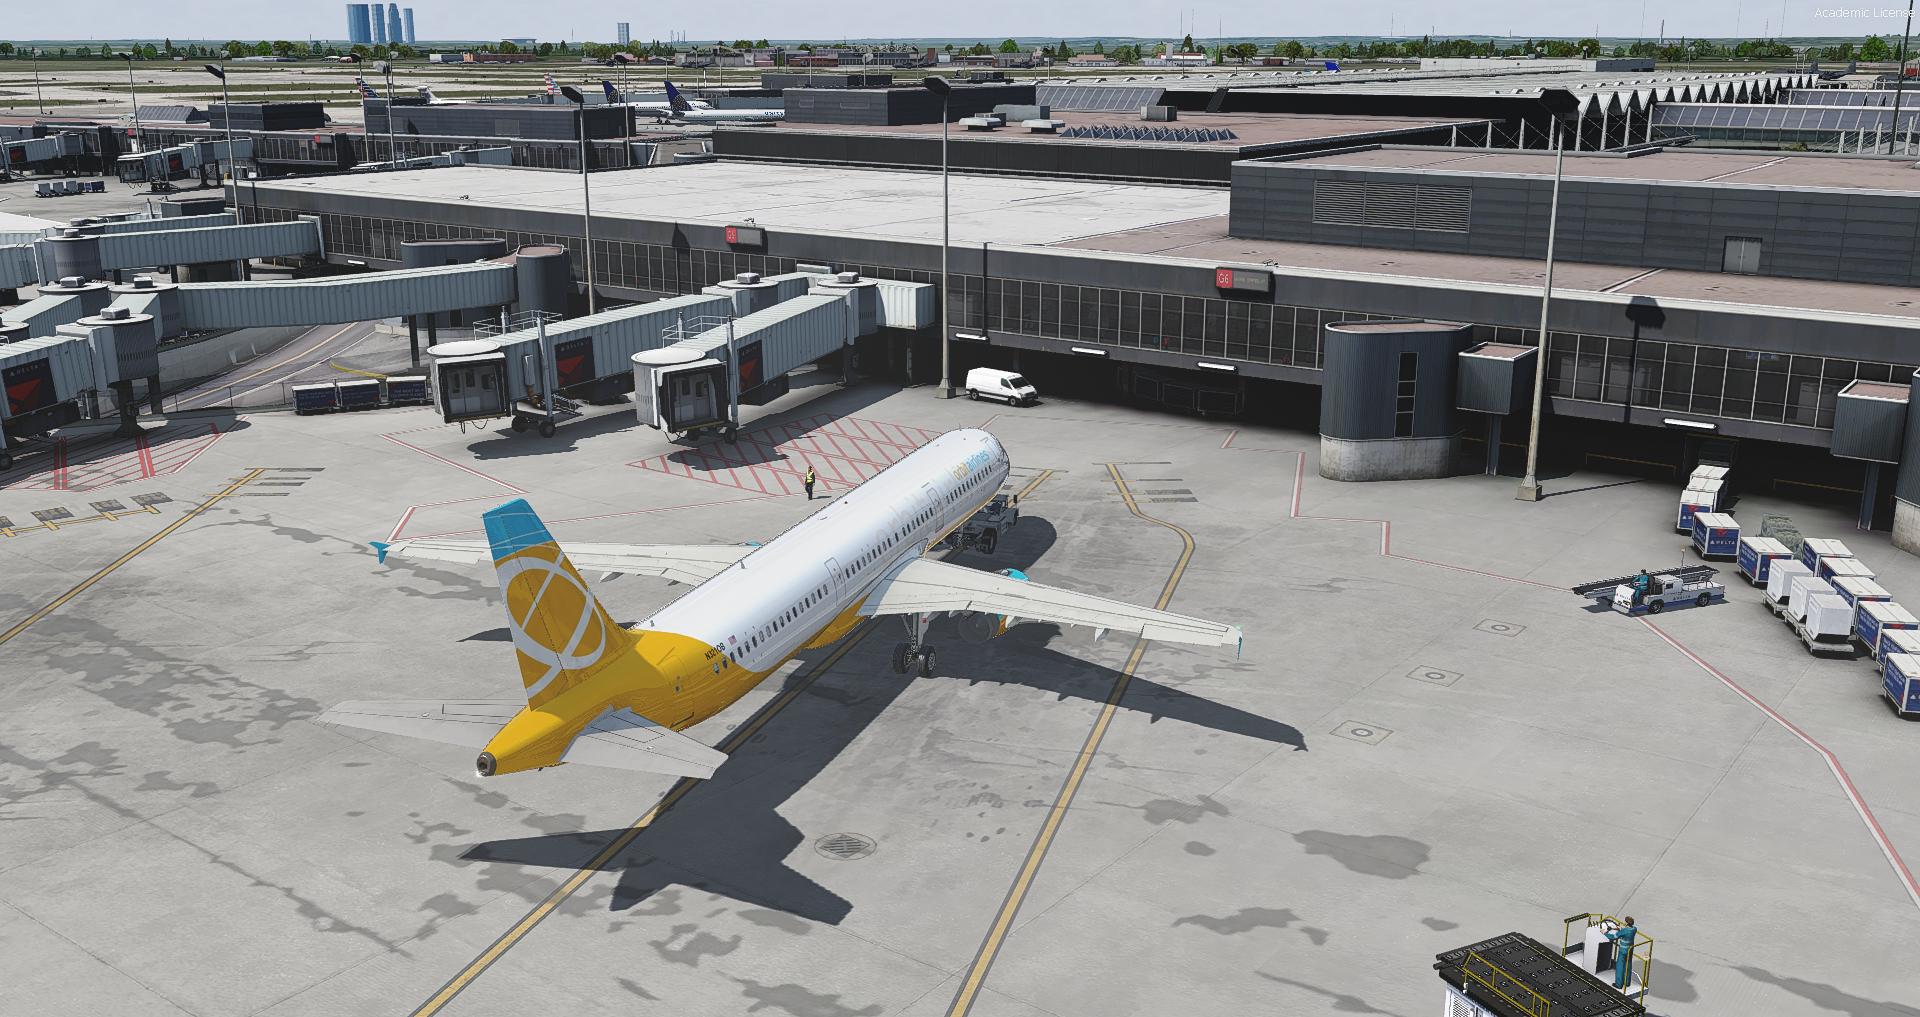 Fsx Orbit Airlines A321 Download